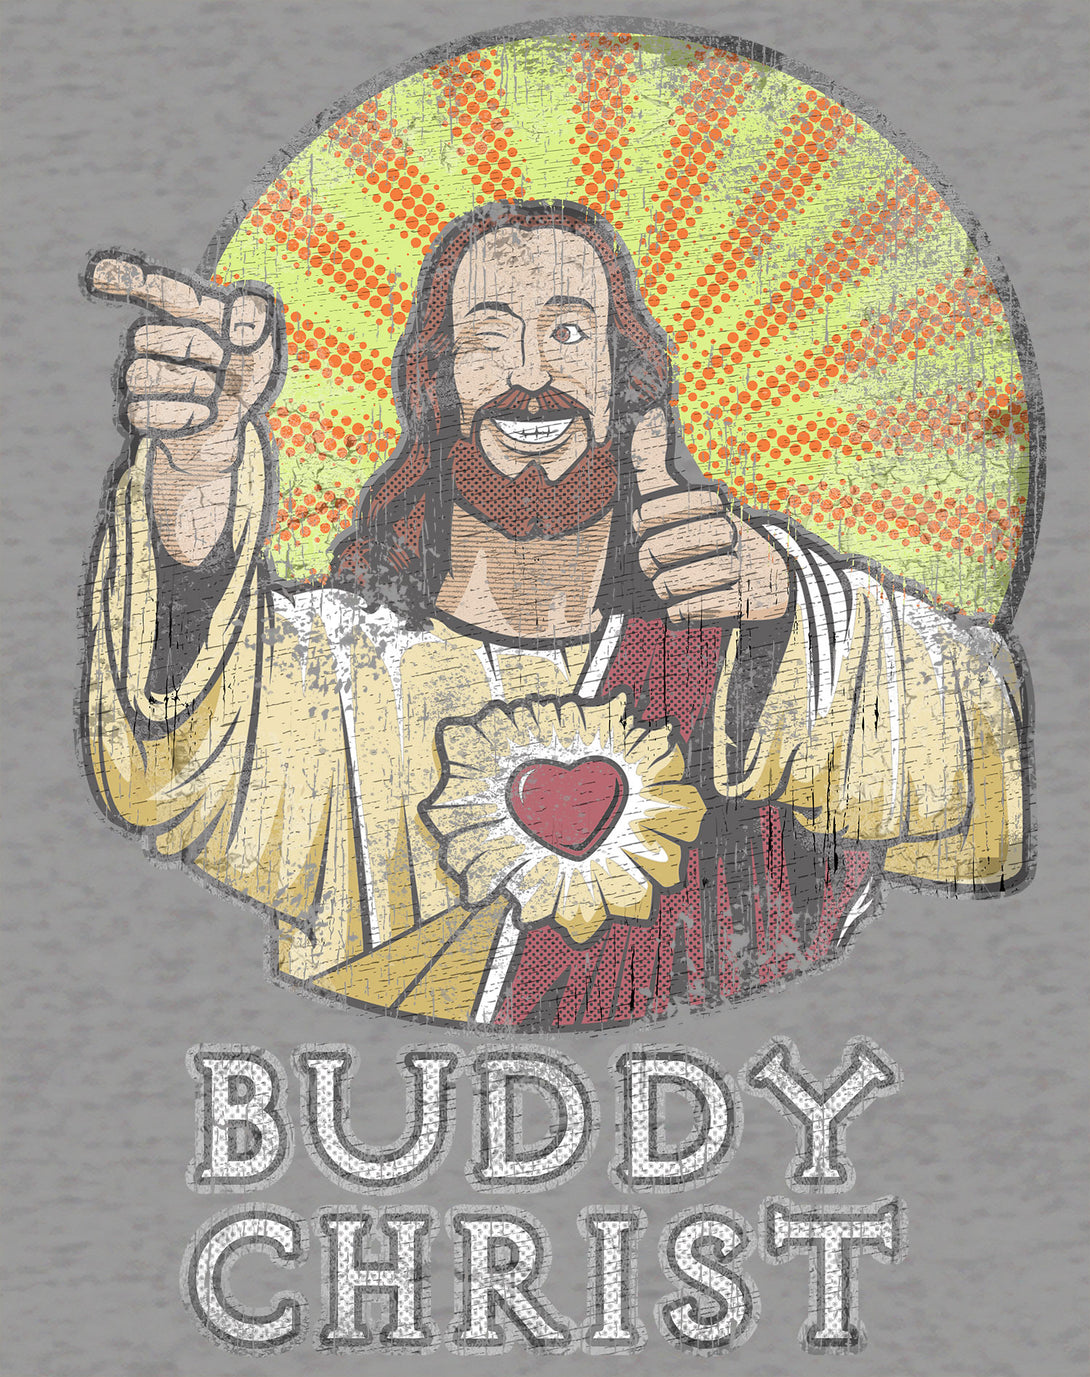 Kevin Smith View Askewniverse Buddy Christ Got Summer Vintage Variant Official Women's T-Shirt Sports Grey - Urban Species Design Close Up